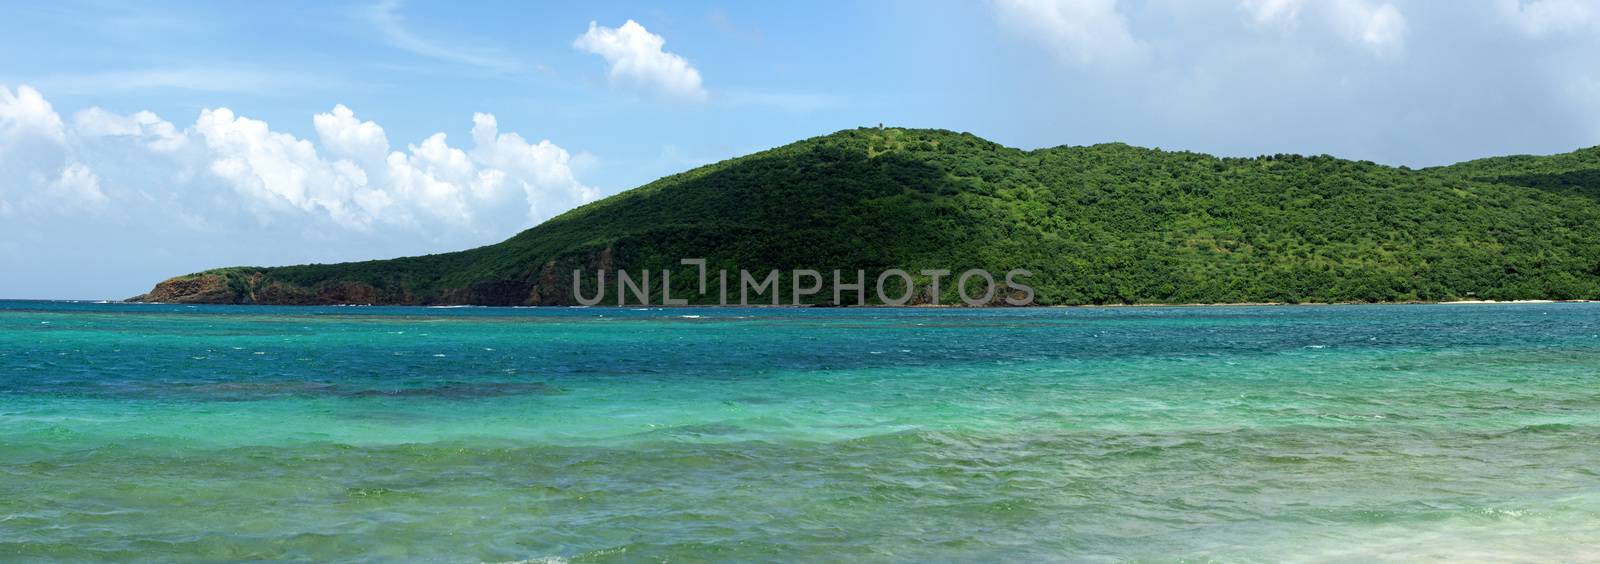 Panoramic view of the gorgeous white sand filled Flamenco beach on the Puerto Rican island of Culebra.